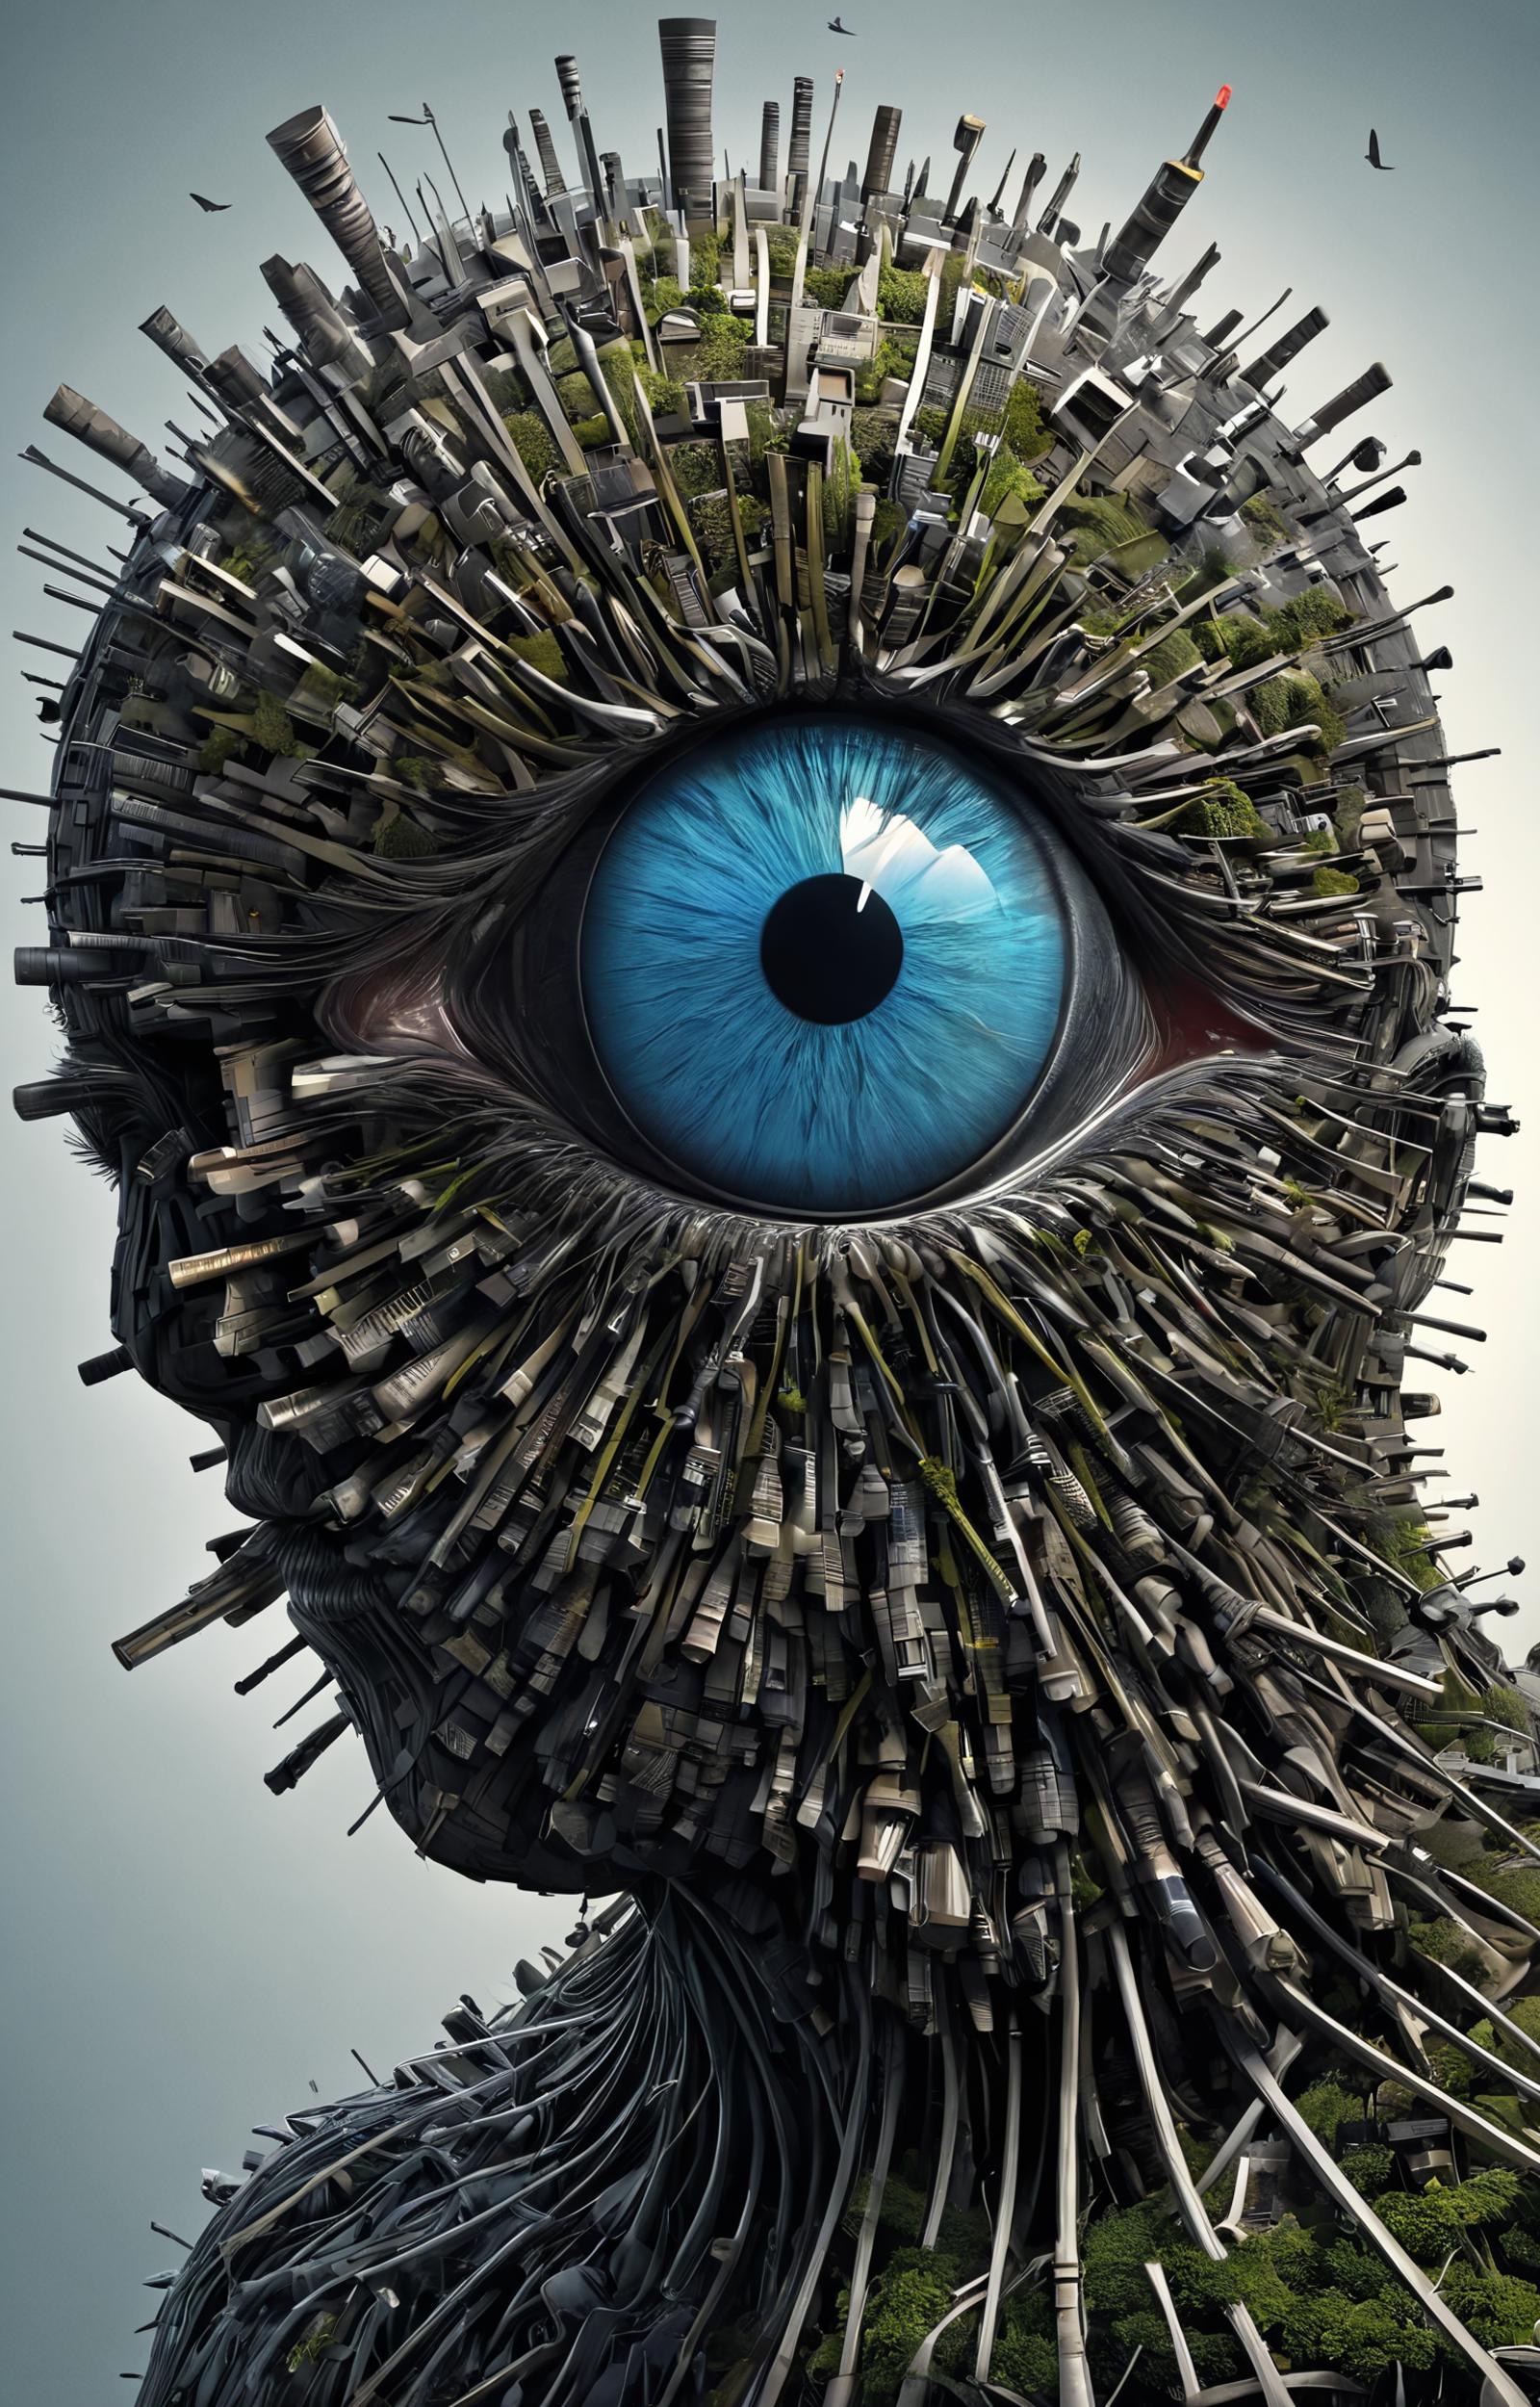 A blue eye staring out of an artistic structure made of scrap metal.